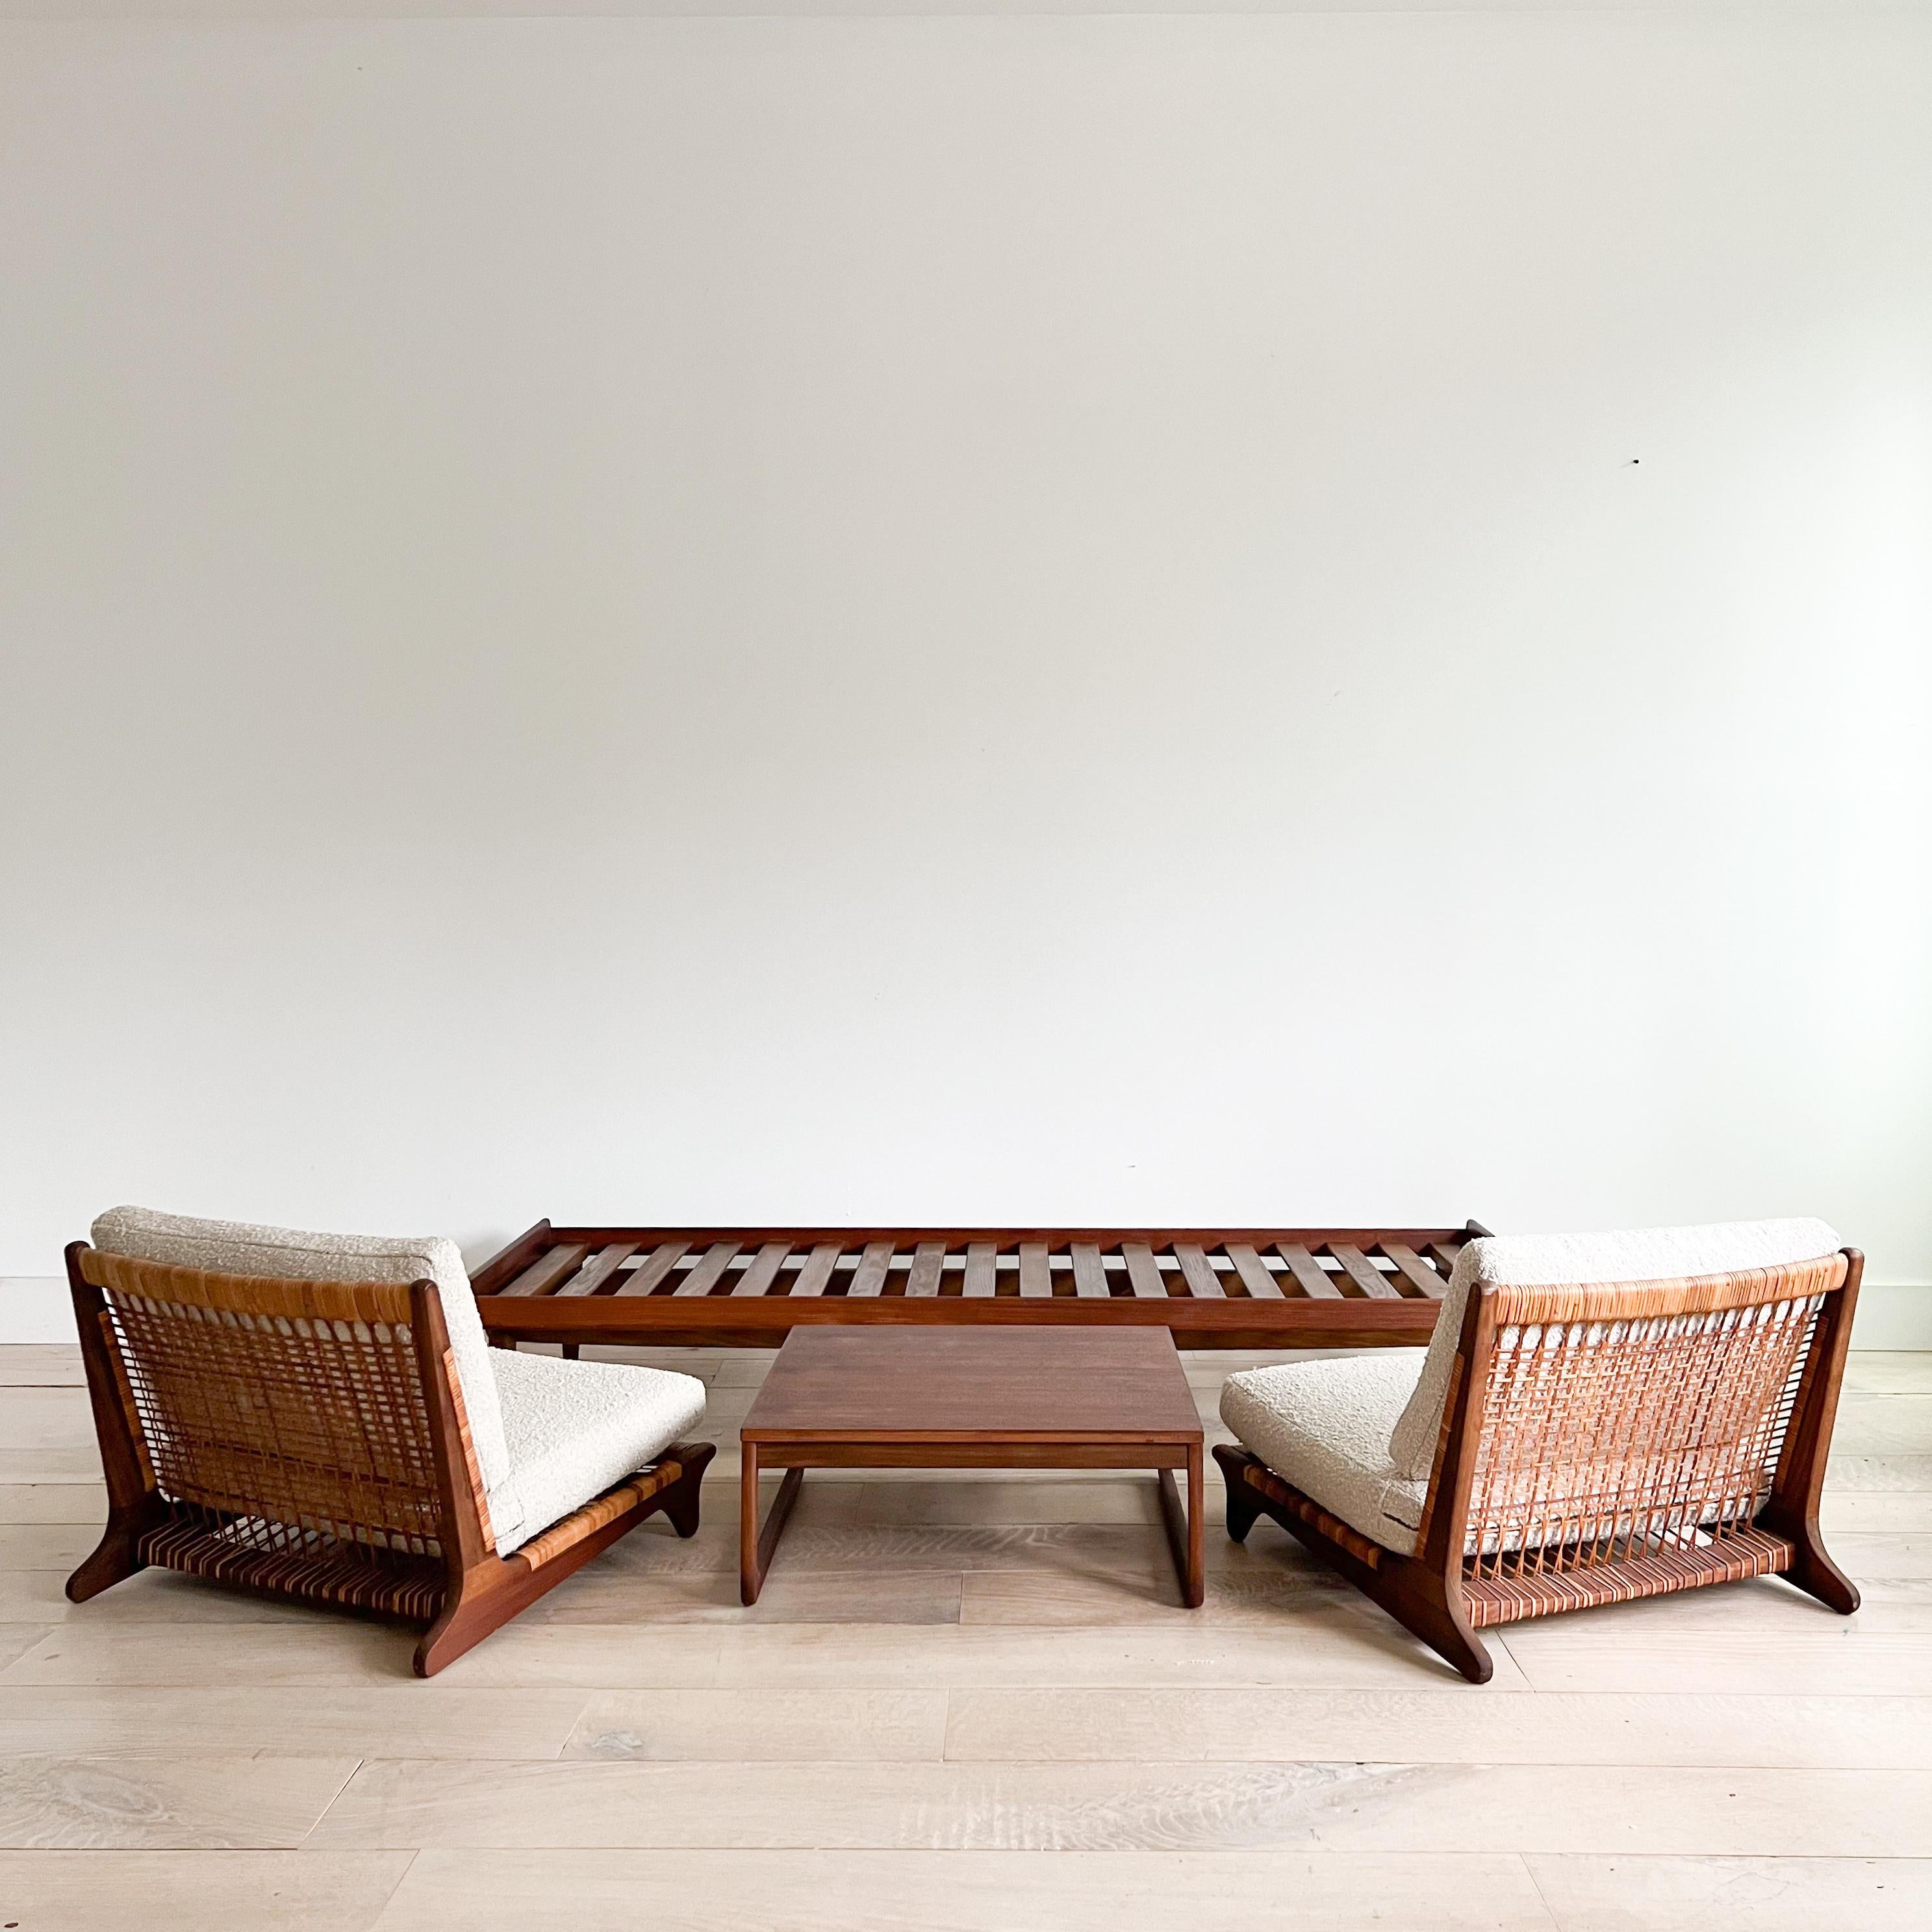 This Danish teak sofa/bench by the renowned Hans Olsen for Bramin is a true gem that seamlessly blends sophistication and comfort. The piece has been thoughtfully restored with new foam and adorned in luxurious oatmeal bouclé upholstery.

While the